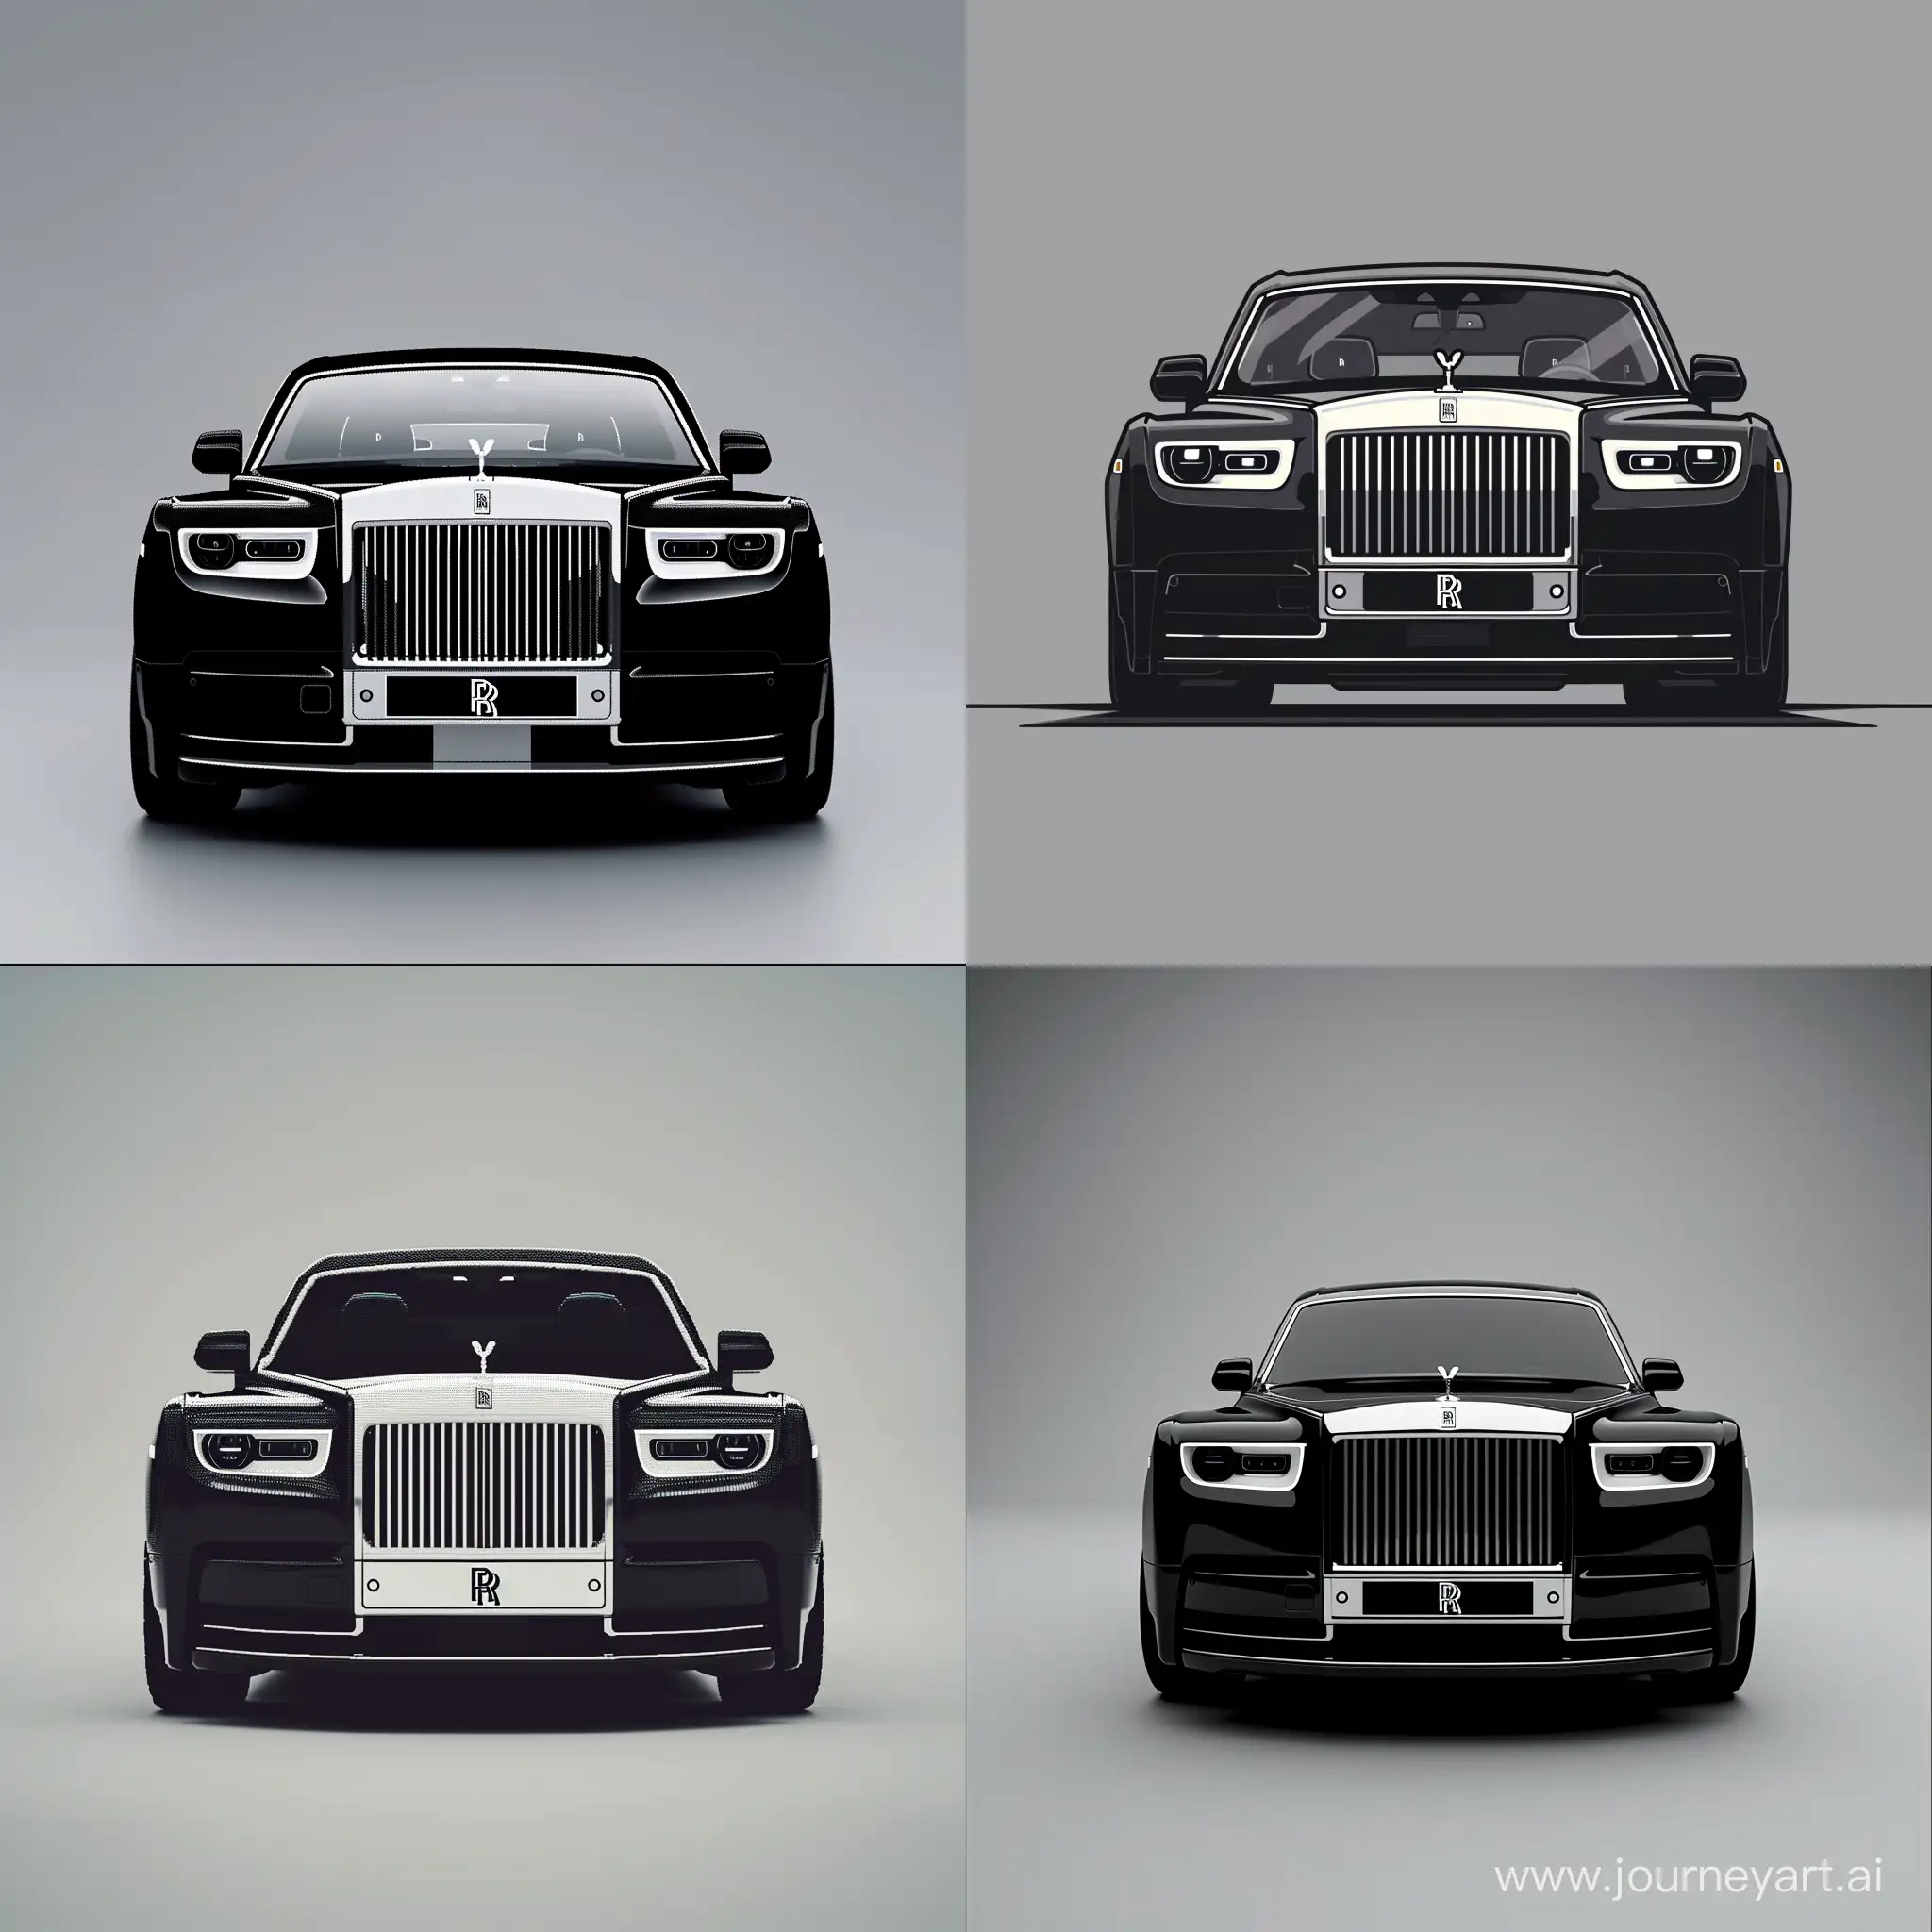 Minimalism Pixel Art Car of Front View, RollsRoyce Phantom: Black Body Color & White Body Details, Simple Gray Background, High Precision